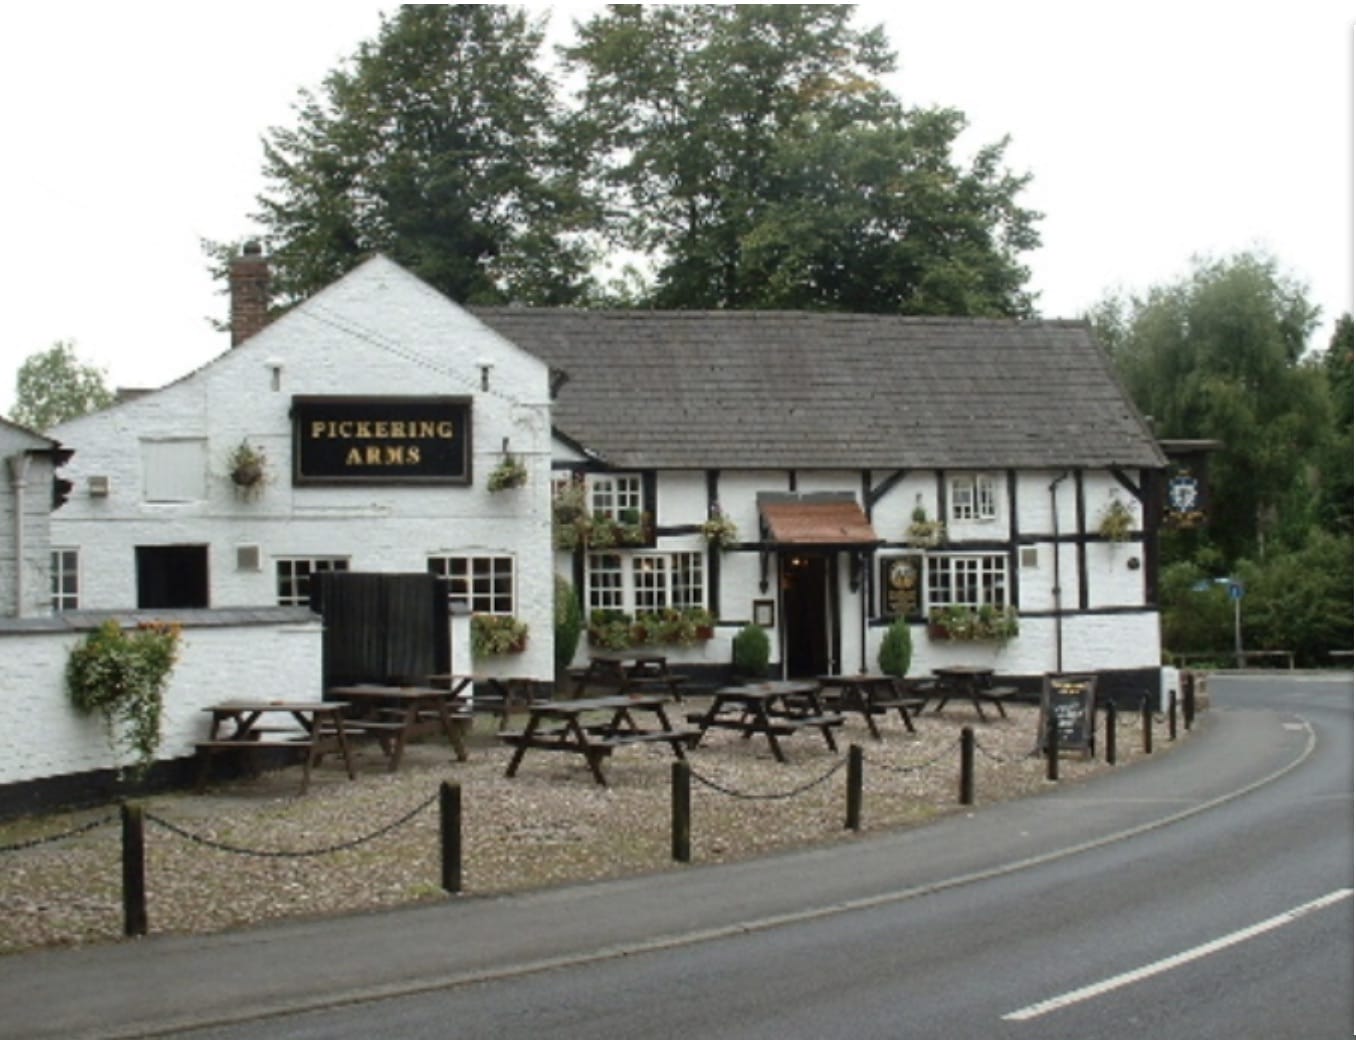 Management Partnership Pubs In Warrington – Run The Pickering Arms !